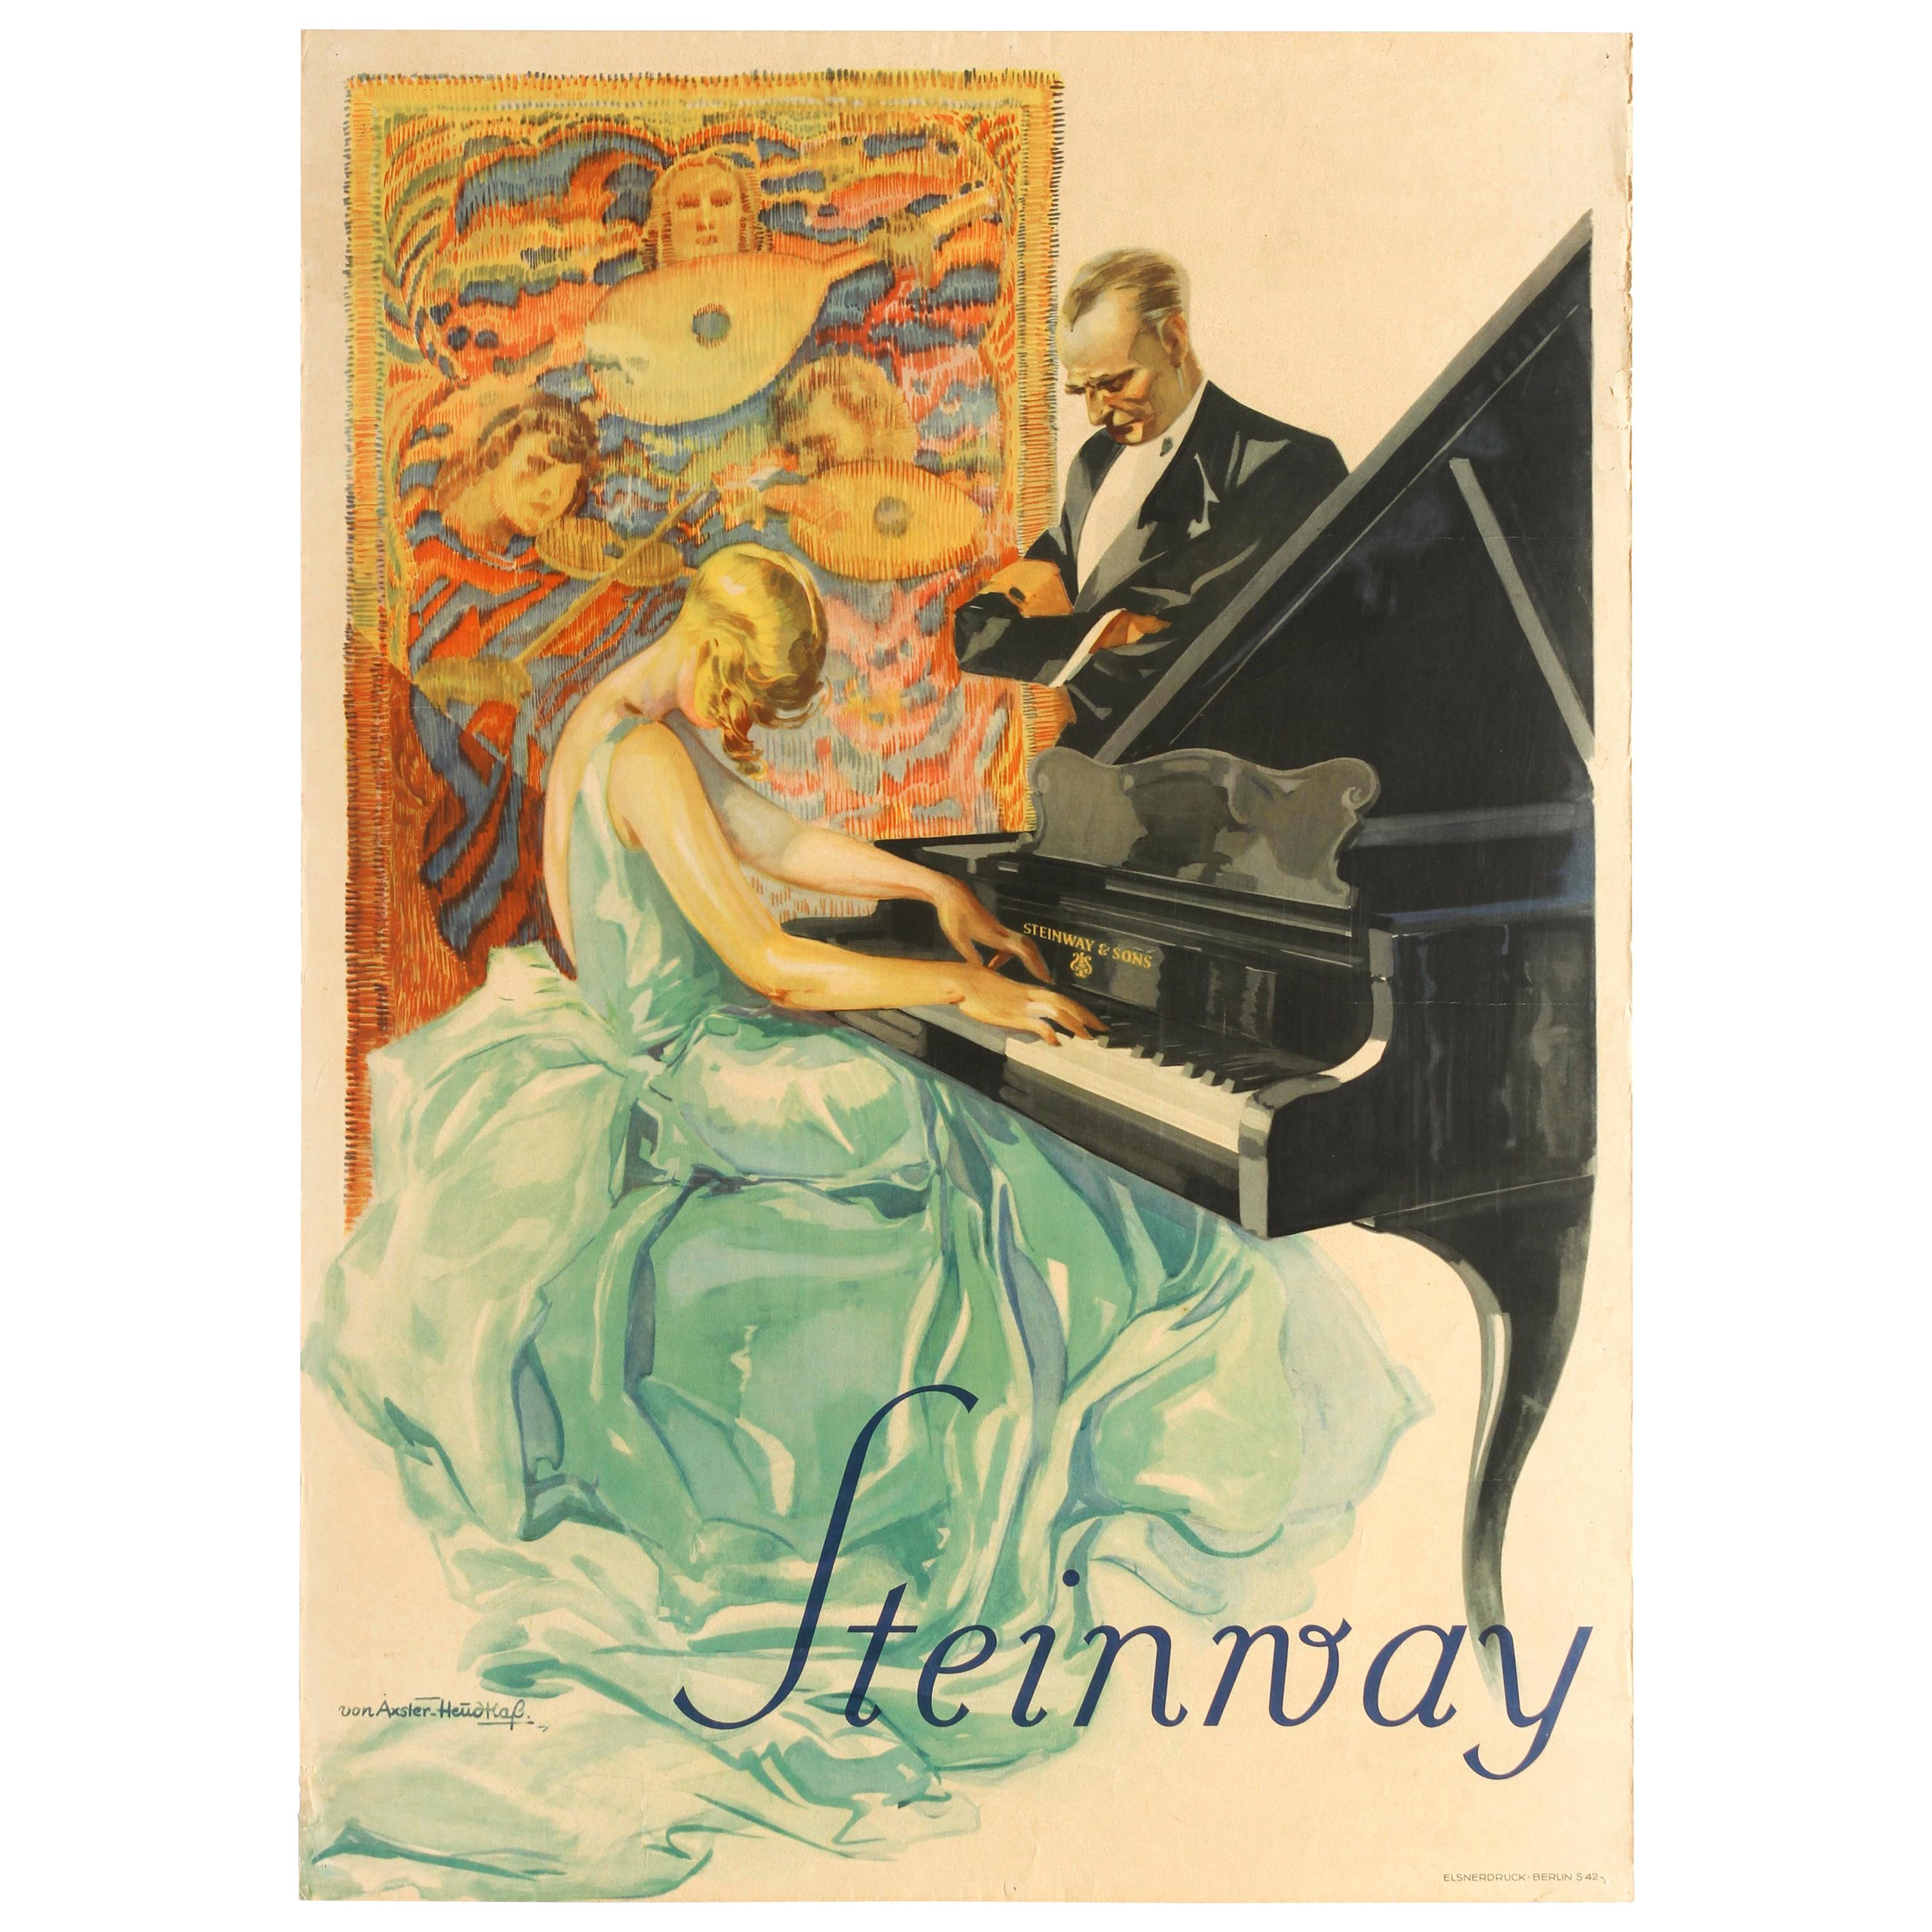 Original Vintage Poster Steinway & Sons Piano Music Tapestry Pianist Art Design